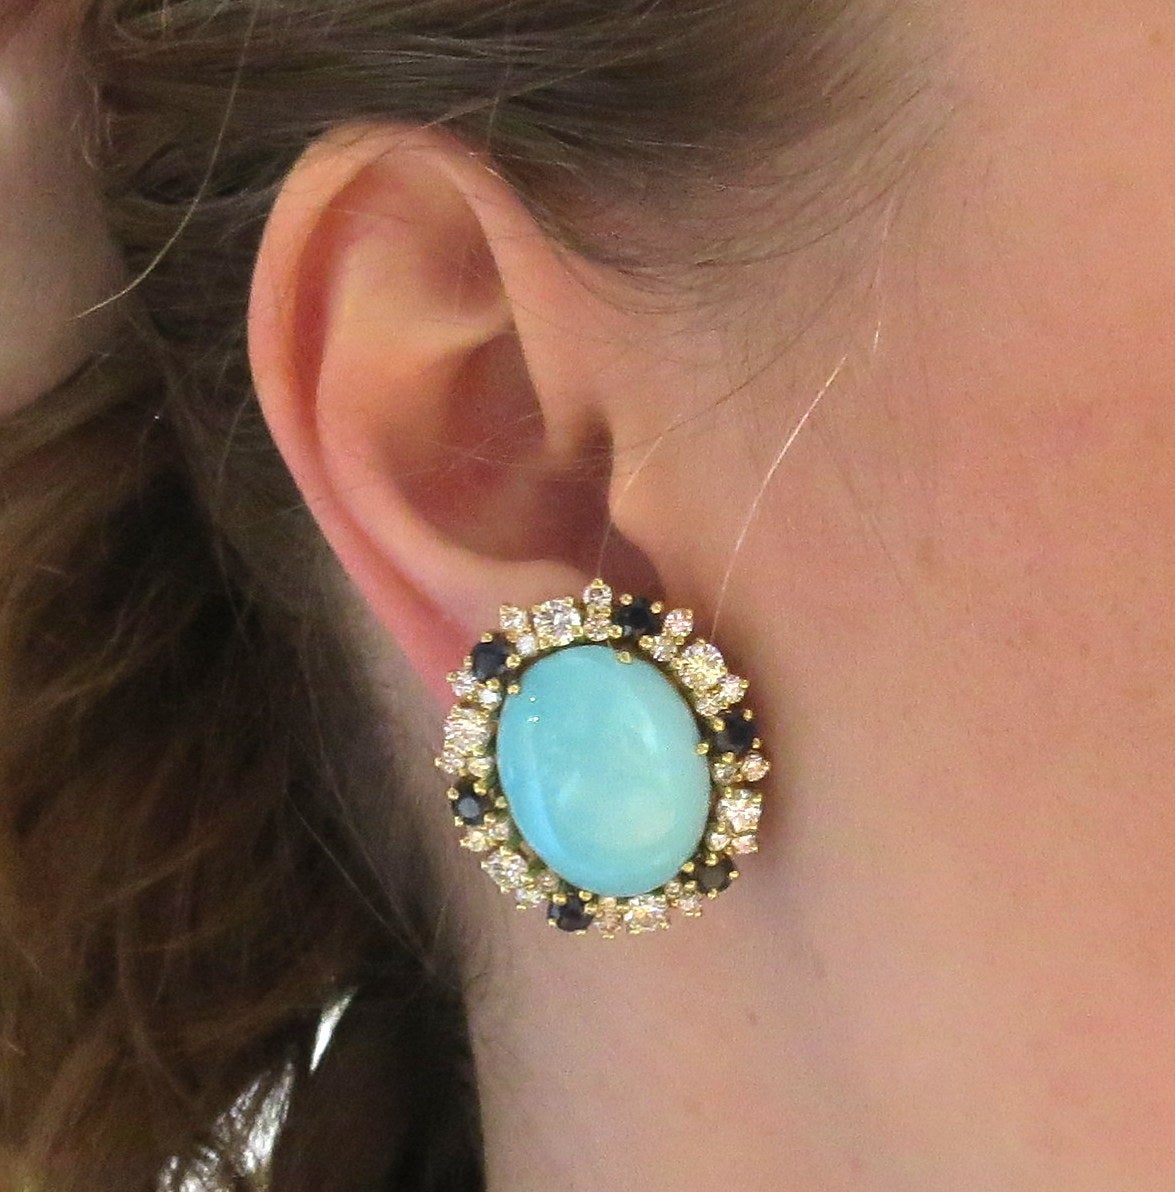 Impressive 18k gold earrings, set with two 20mm x 16mm turquoise stones, surrounded with blue sapphires and approximately 4.0-4.20ctw in diamonds. Earrings measure 29mm x 26mm. Weight - 31.5 grams